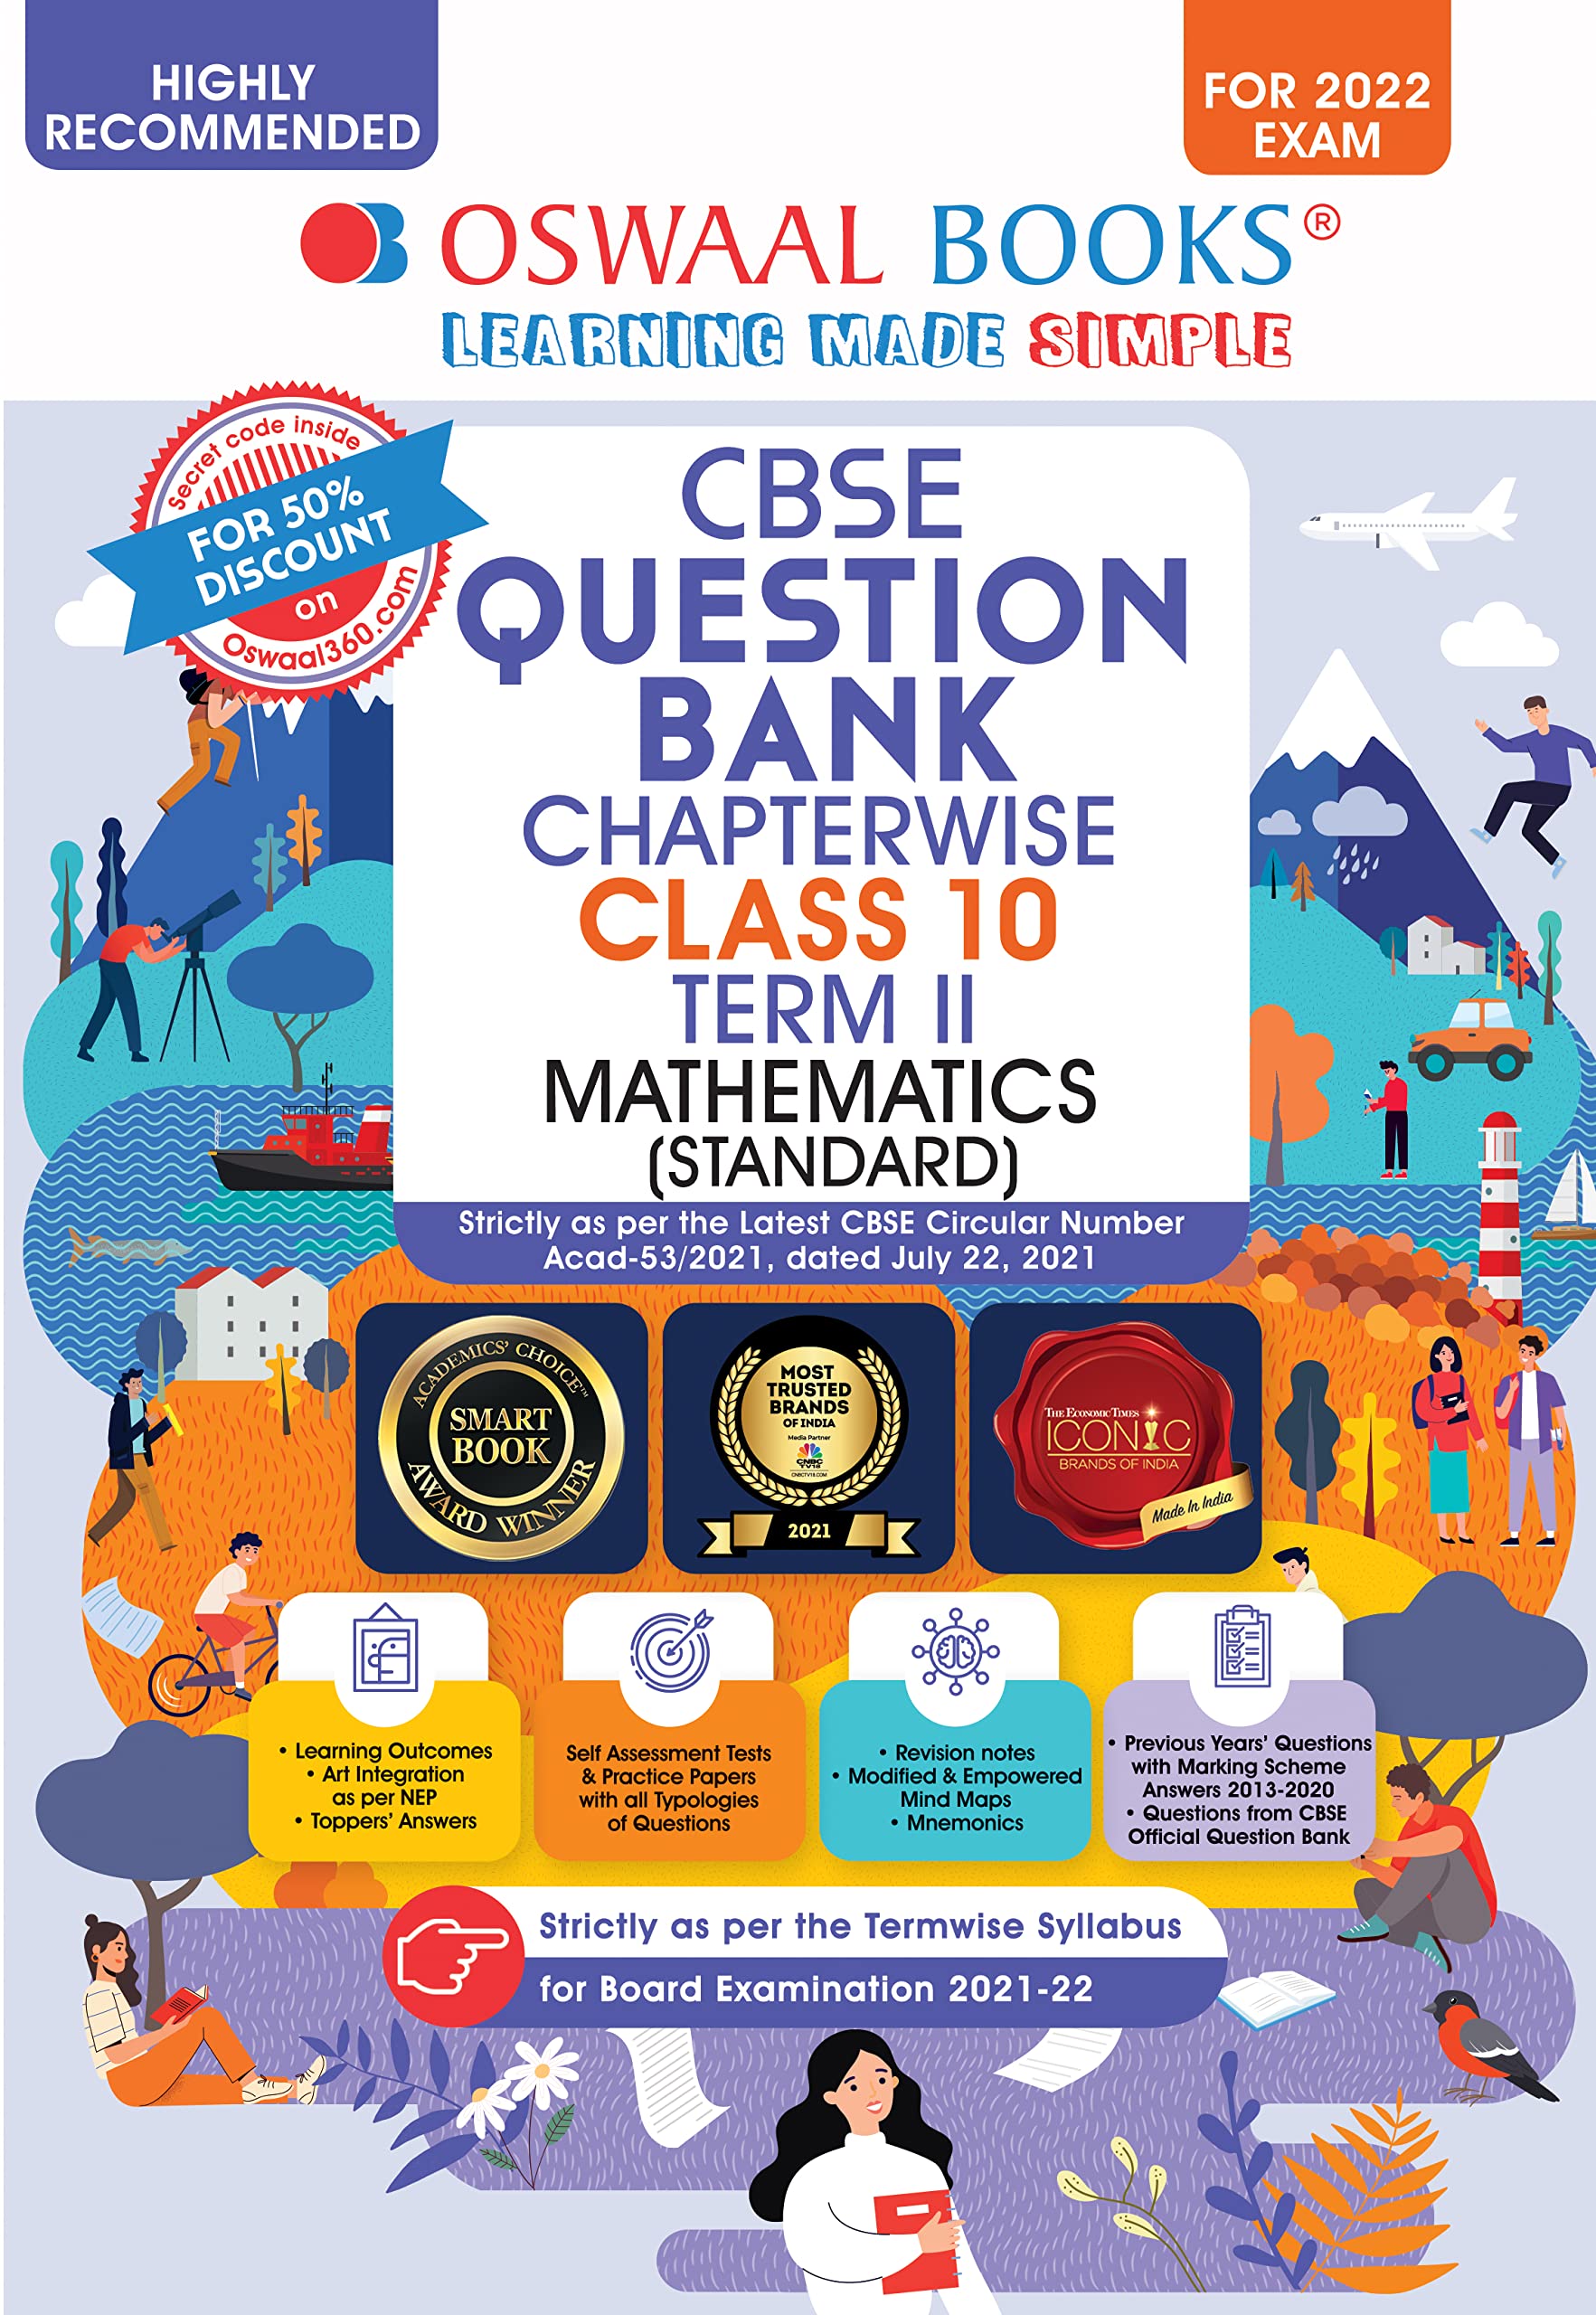 Oswaal CBSE Question Bank Chapterwise For Term 2, Class 10, Mathematics (Standard) (For 2022 Exam